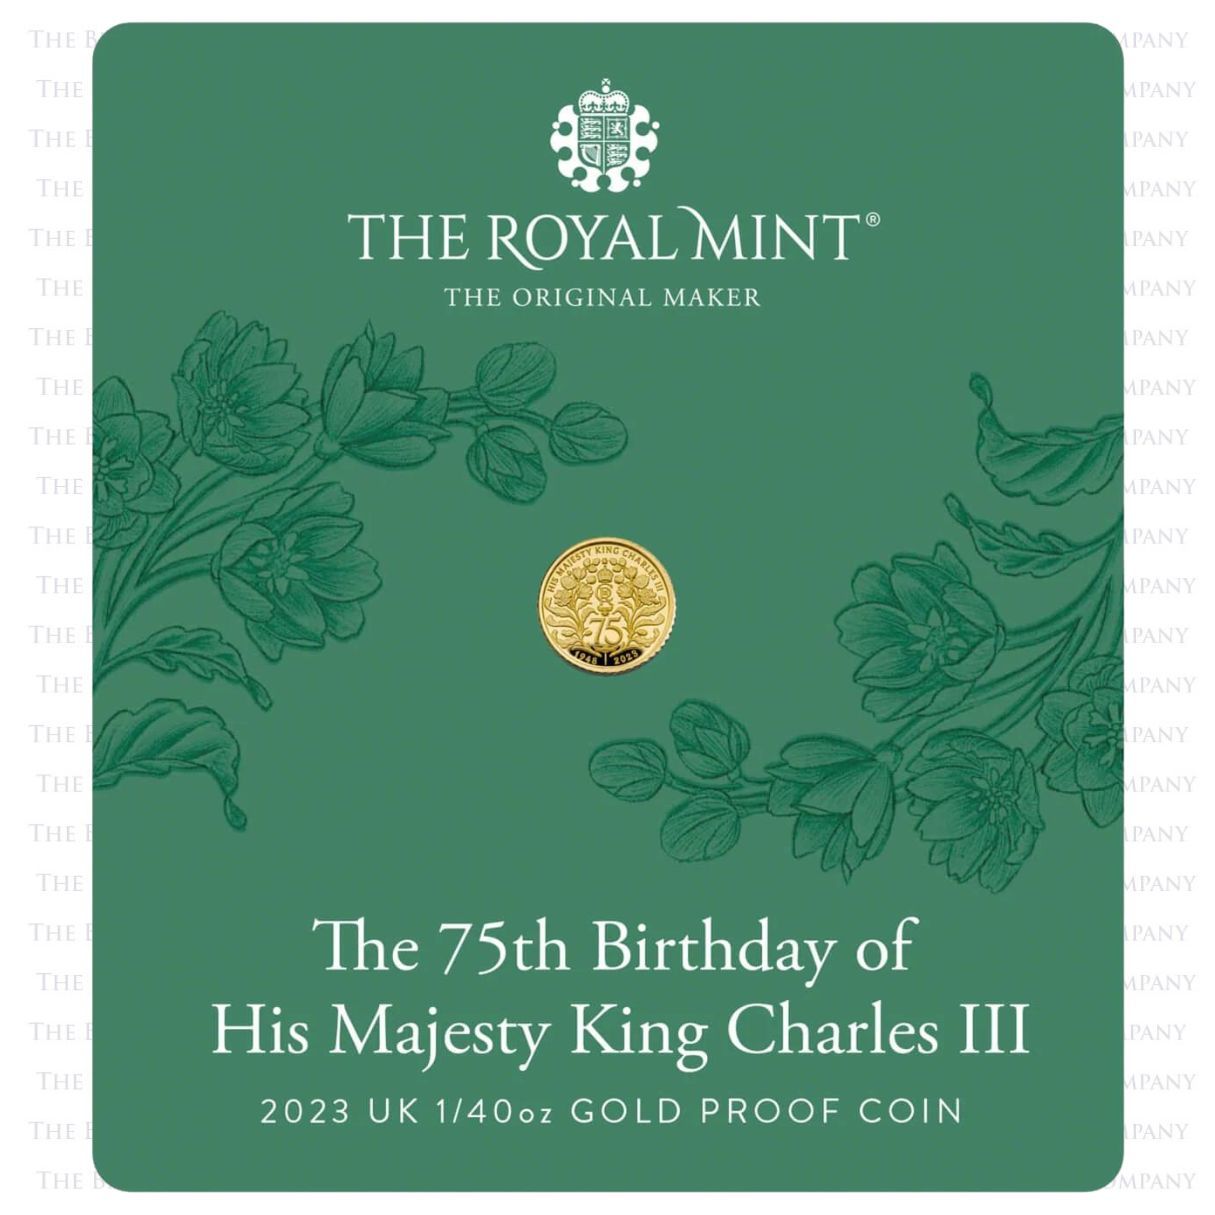 UK2375G40 2023 King Charles III 75th Birthday Fortieth Ounce Gold Proof Coin In Card